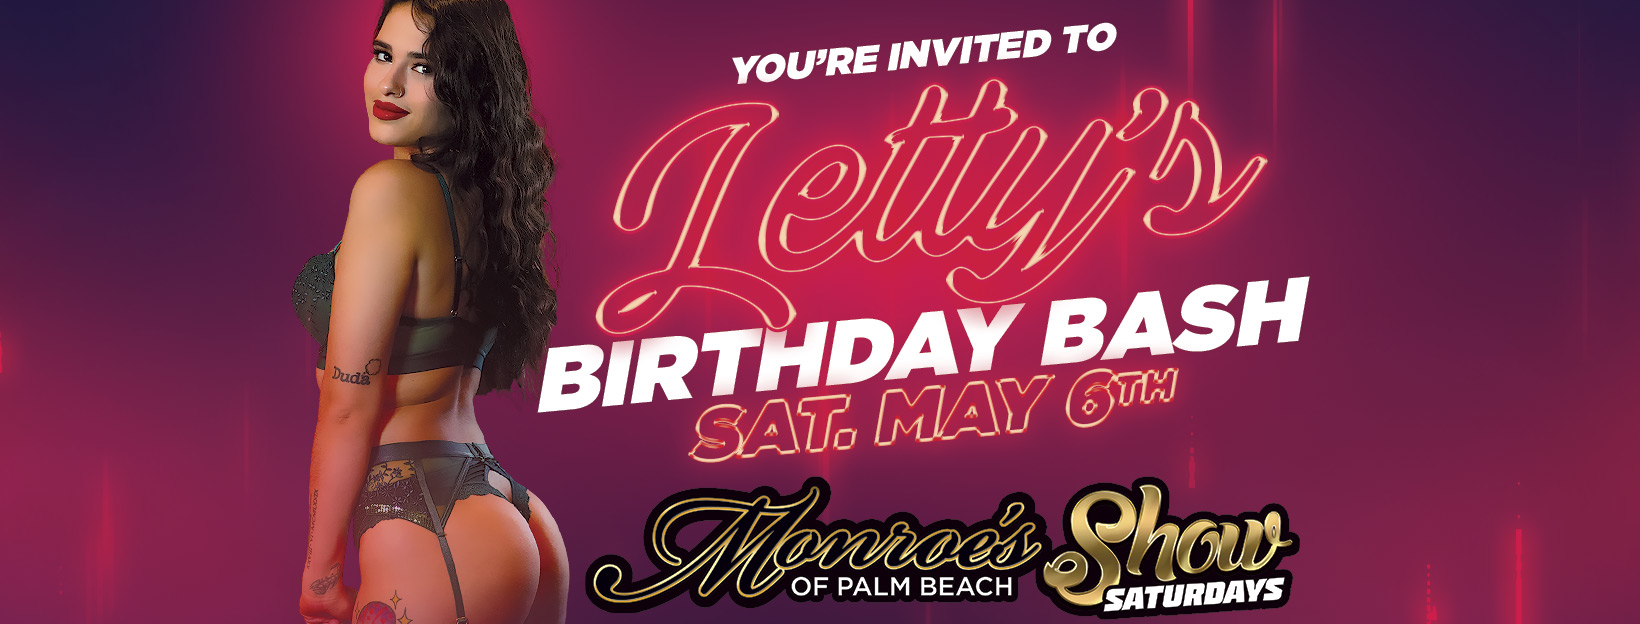 letty's Birthday Bash May 6th at Monroes Palm Beach